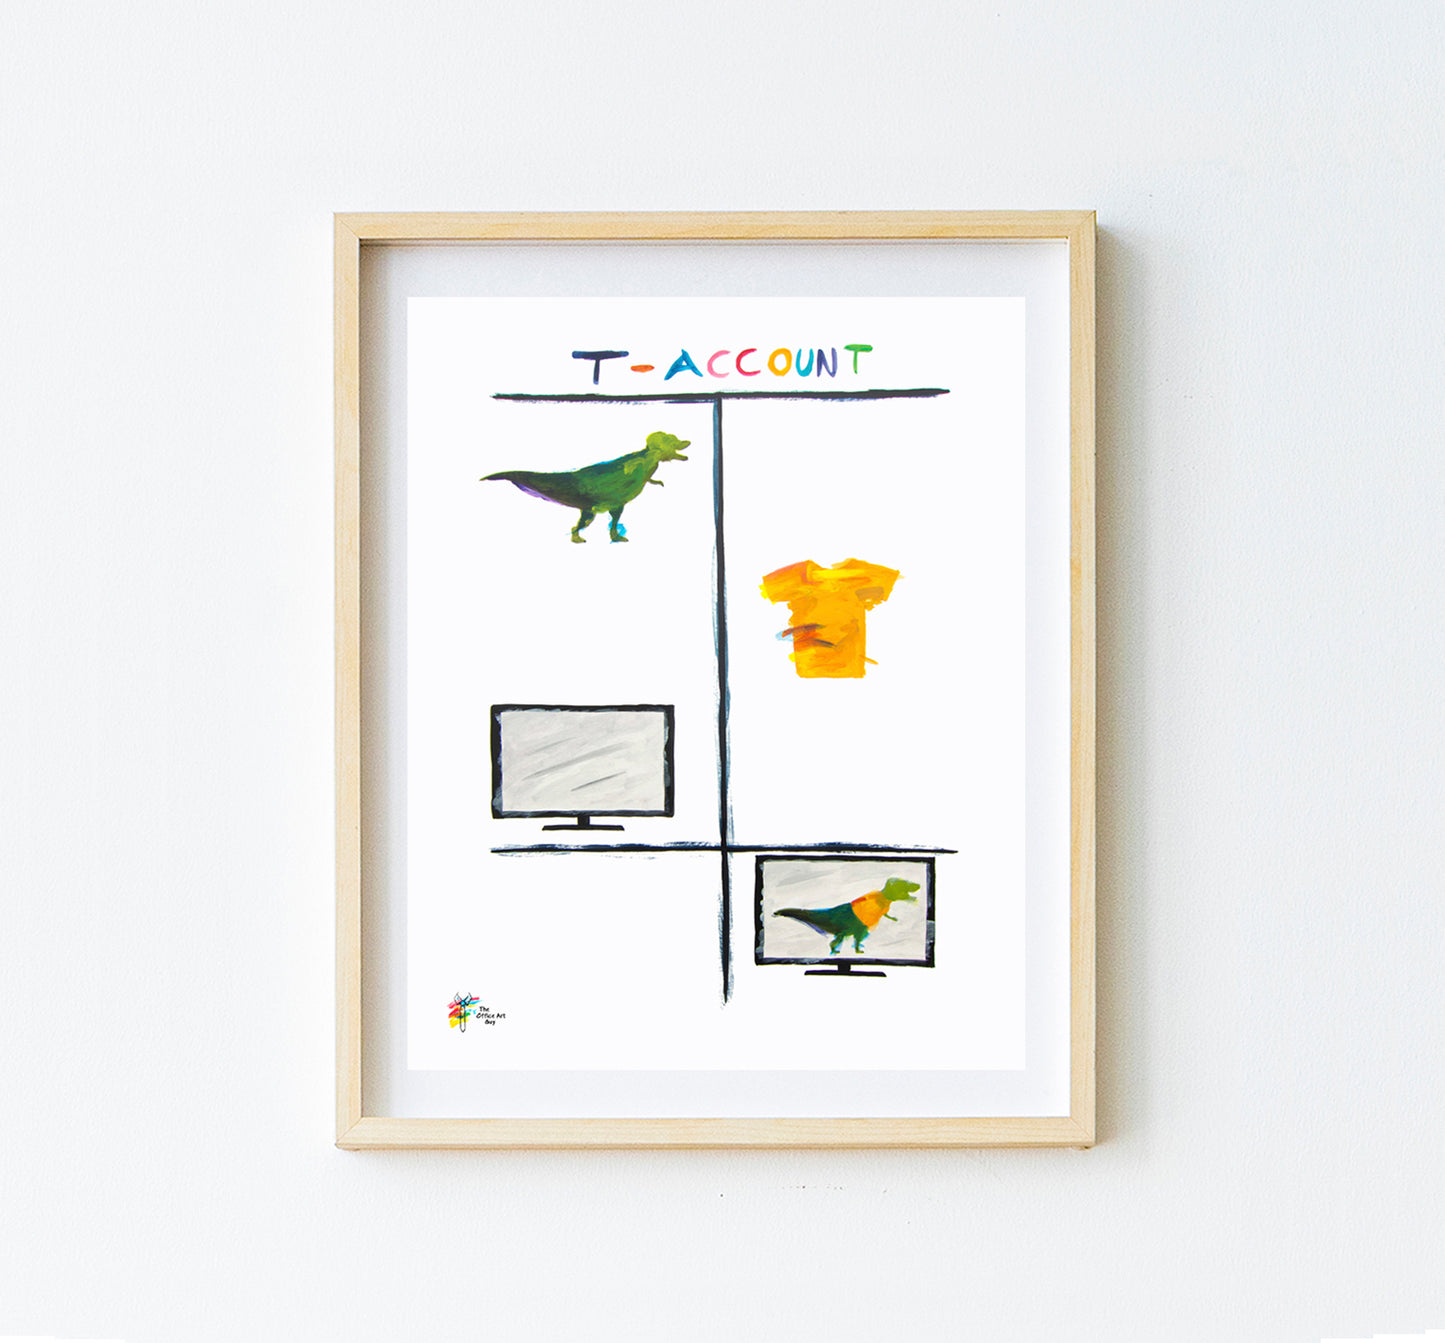 Accountant Art Print T Rex T Account by The Office Art Guy